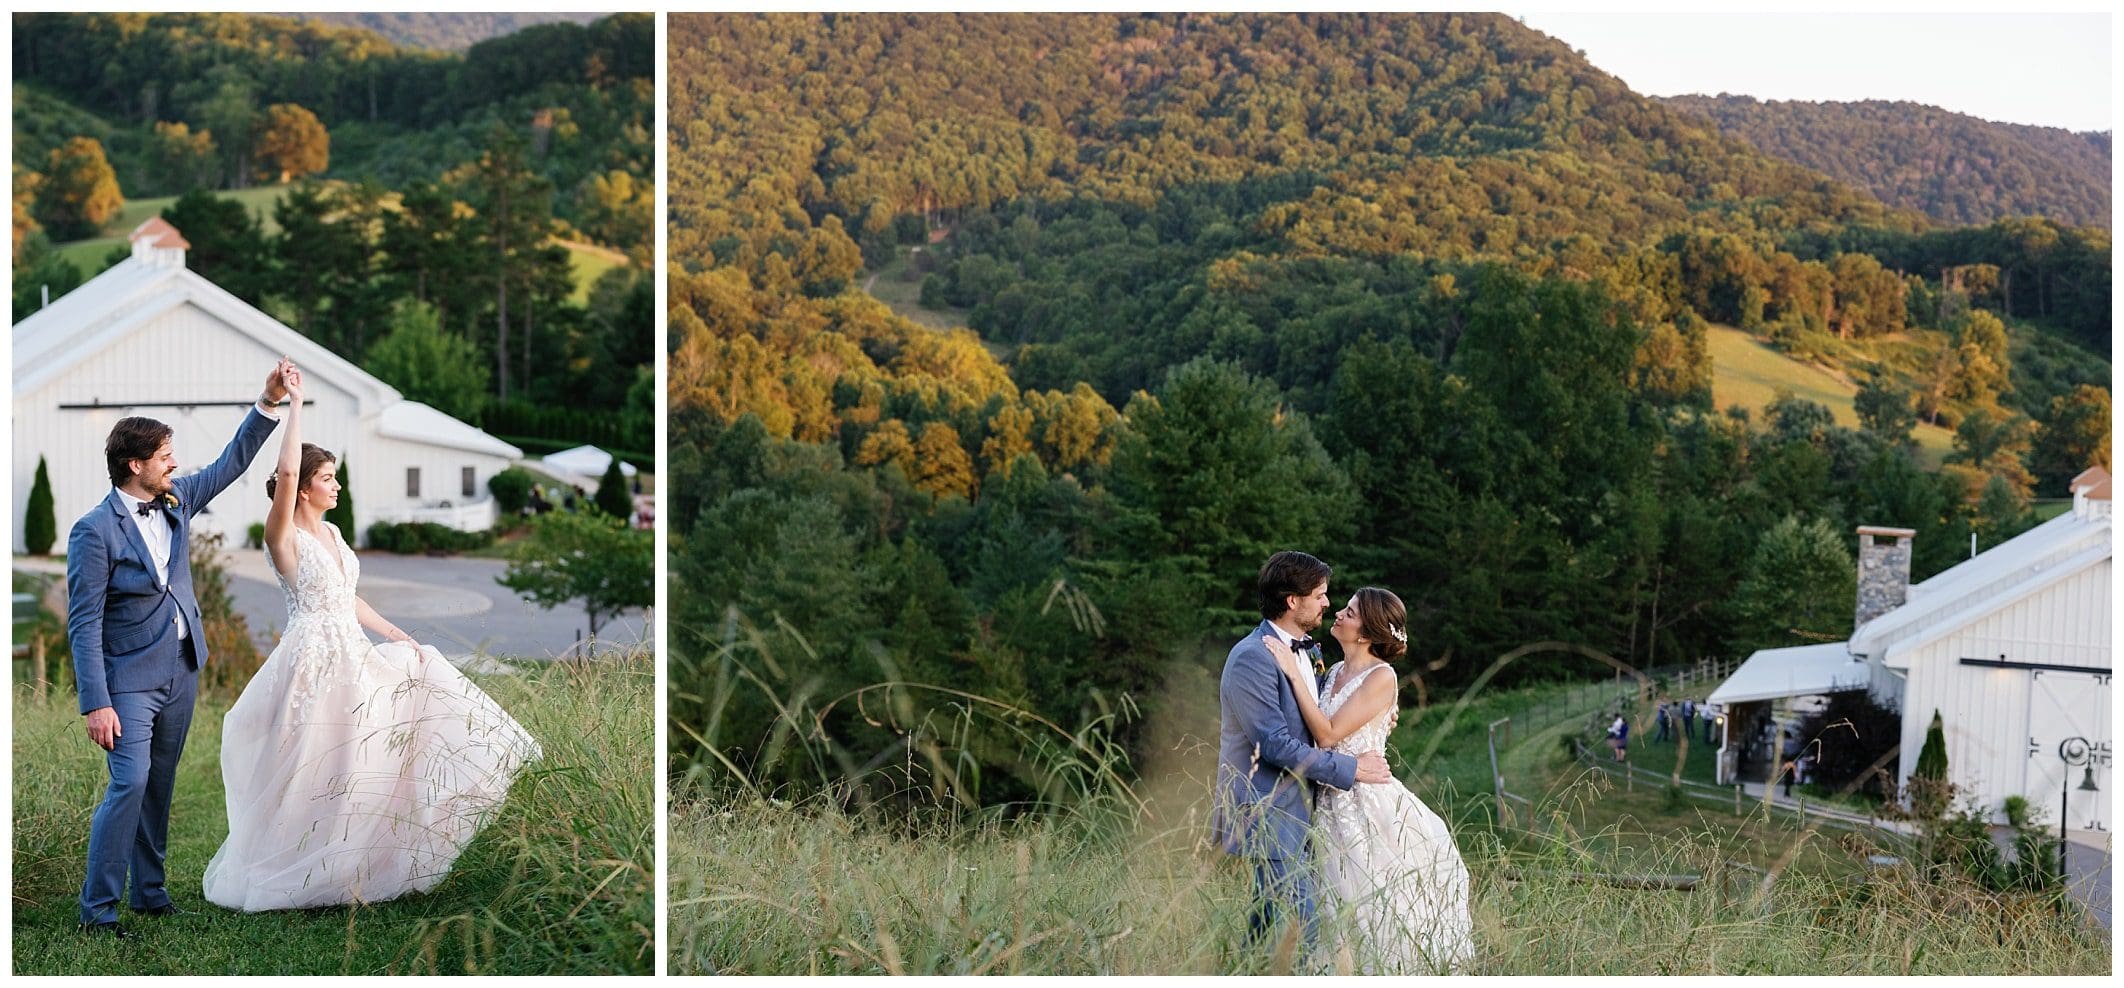 A bride and groom standing in a field with mountains in the background atsummer dream wedding at Chestnut Ridge.